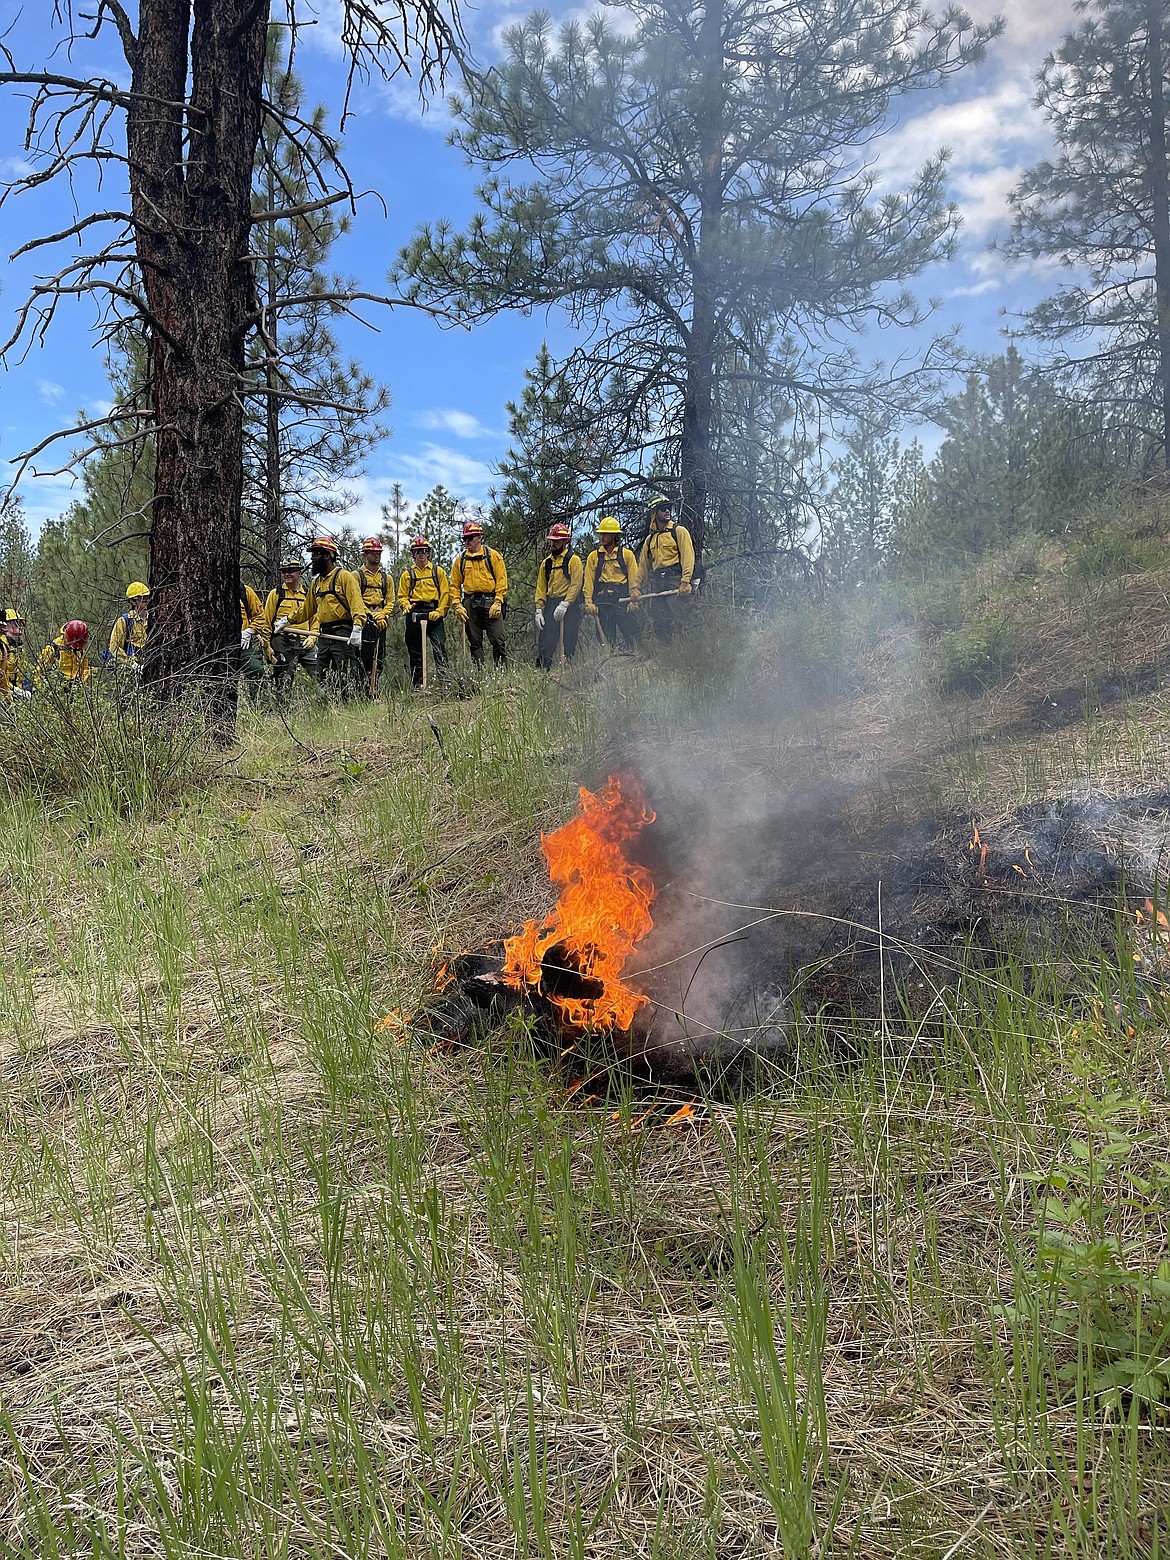 Wildland firefighter recruits near Idaho City practice techniques as part of their annual interagency fire training in May. Conditions leading into summer left the region low in snow pack and ground moisture compared to past years, which led to the 141 fires that have already sprung so far this year.